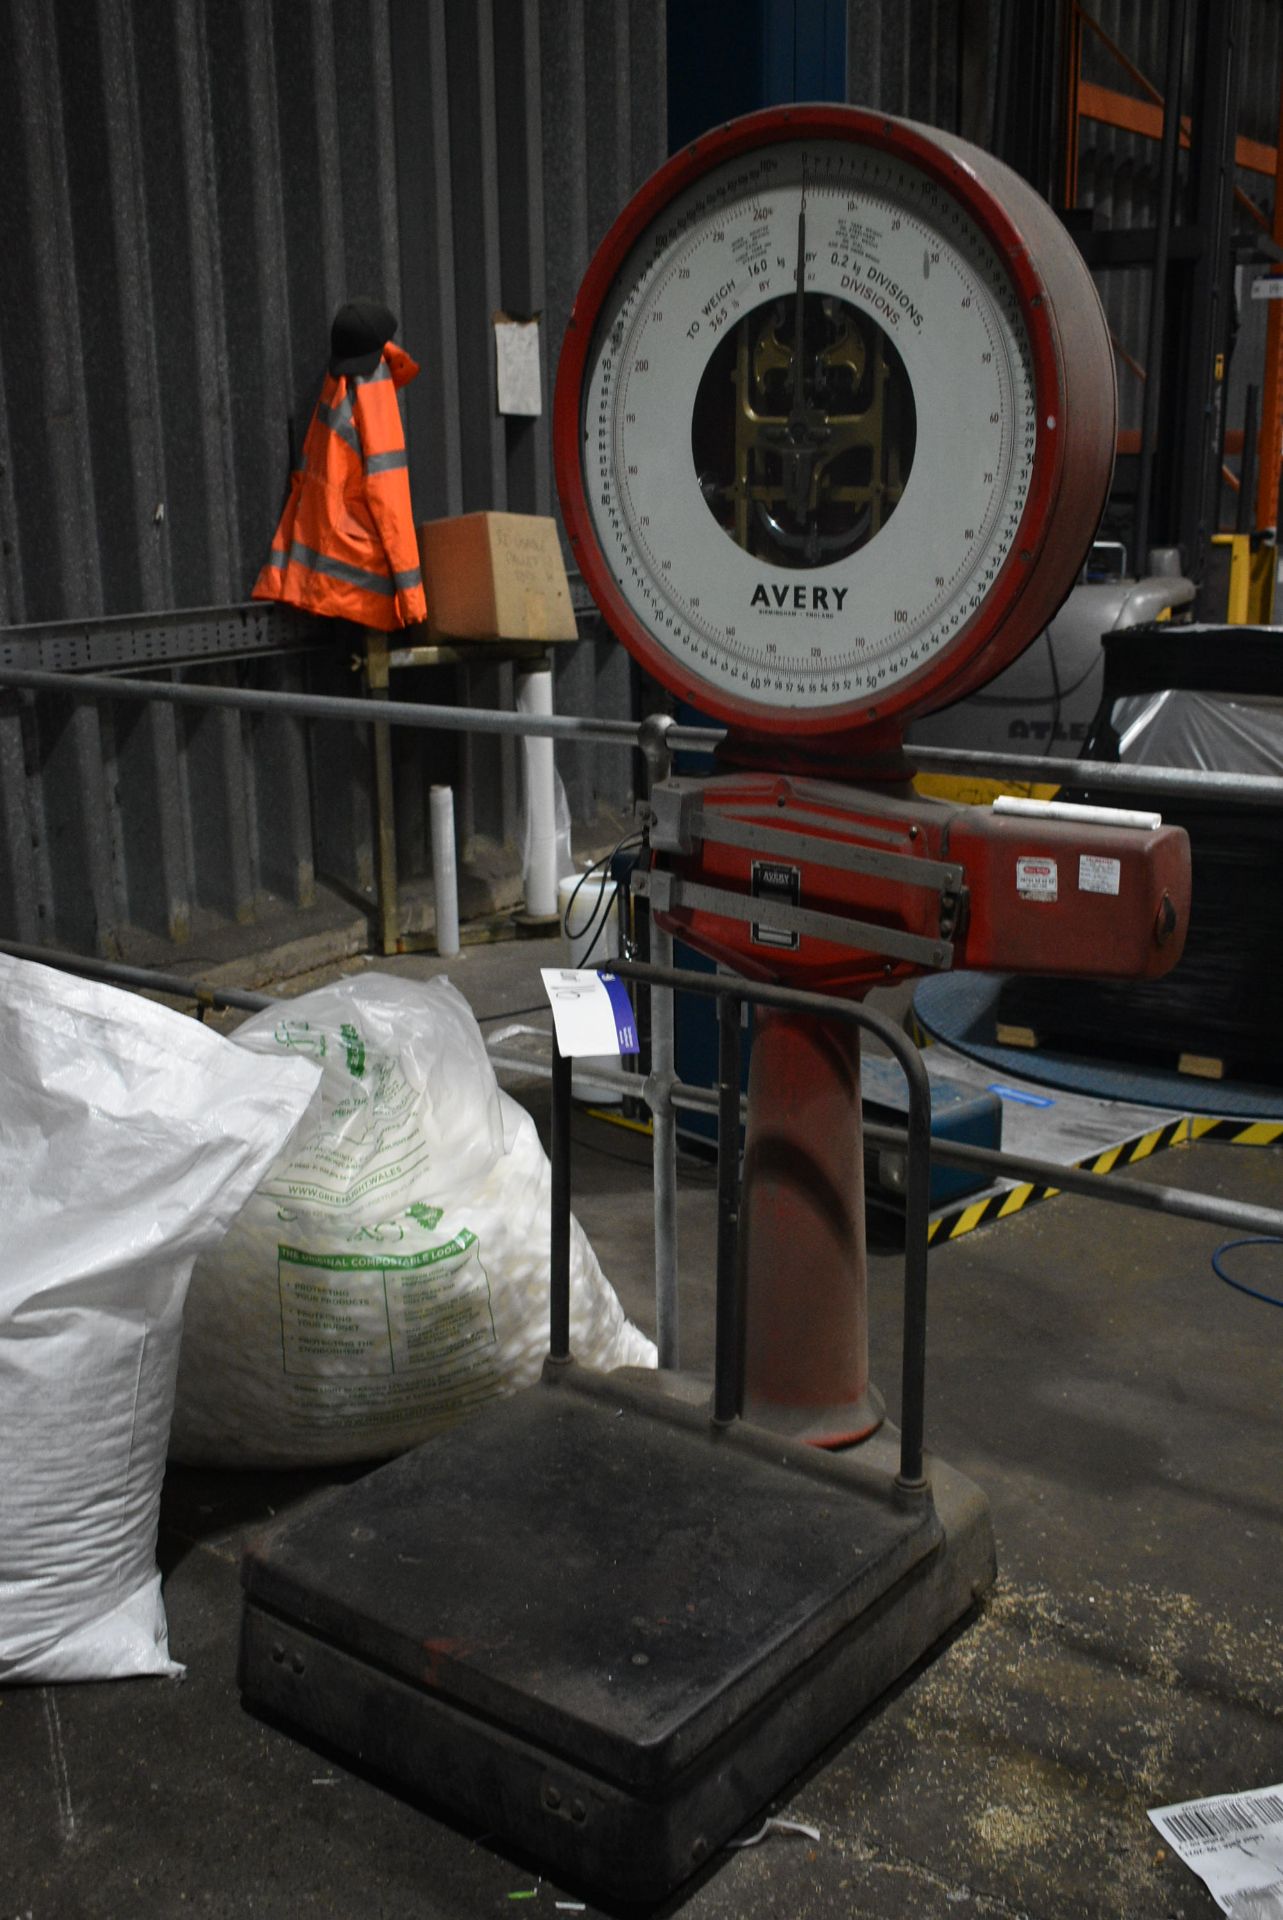 Avery 3205 CHE 110kg capacity Dial Indicating Portable Platform Weighing Machine, serial no. S- - Image 2 of 4